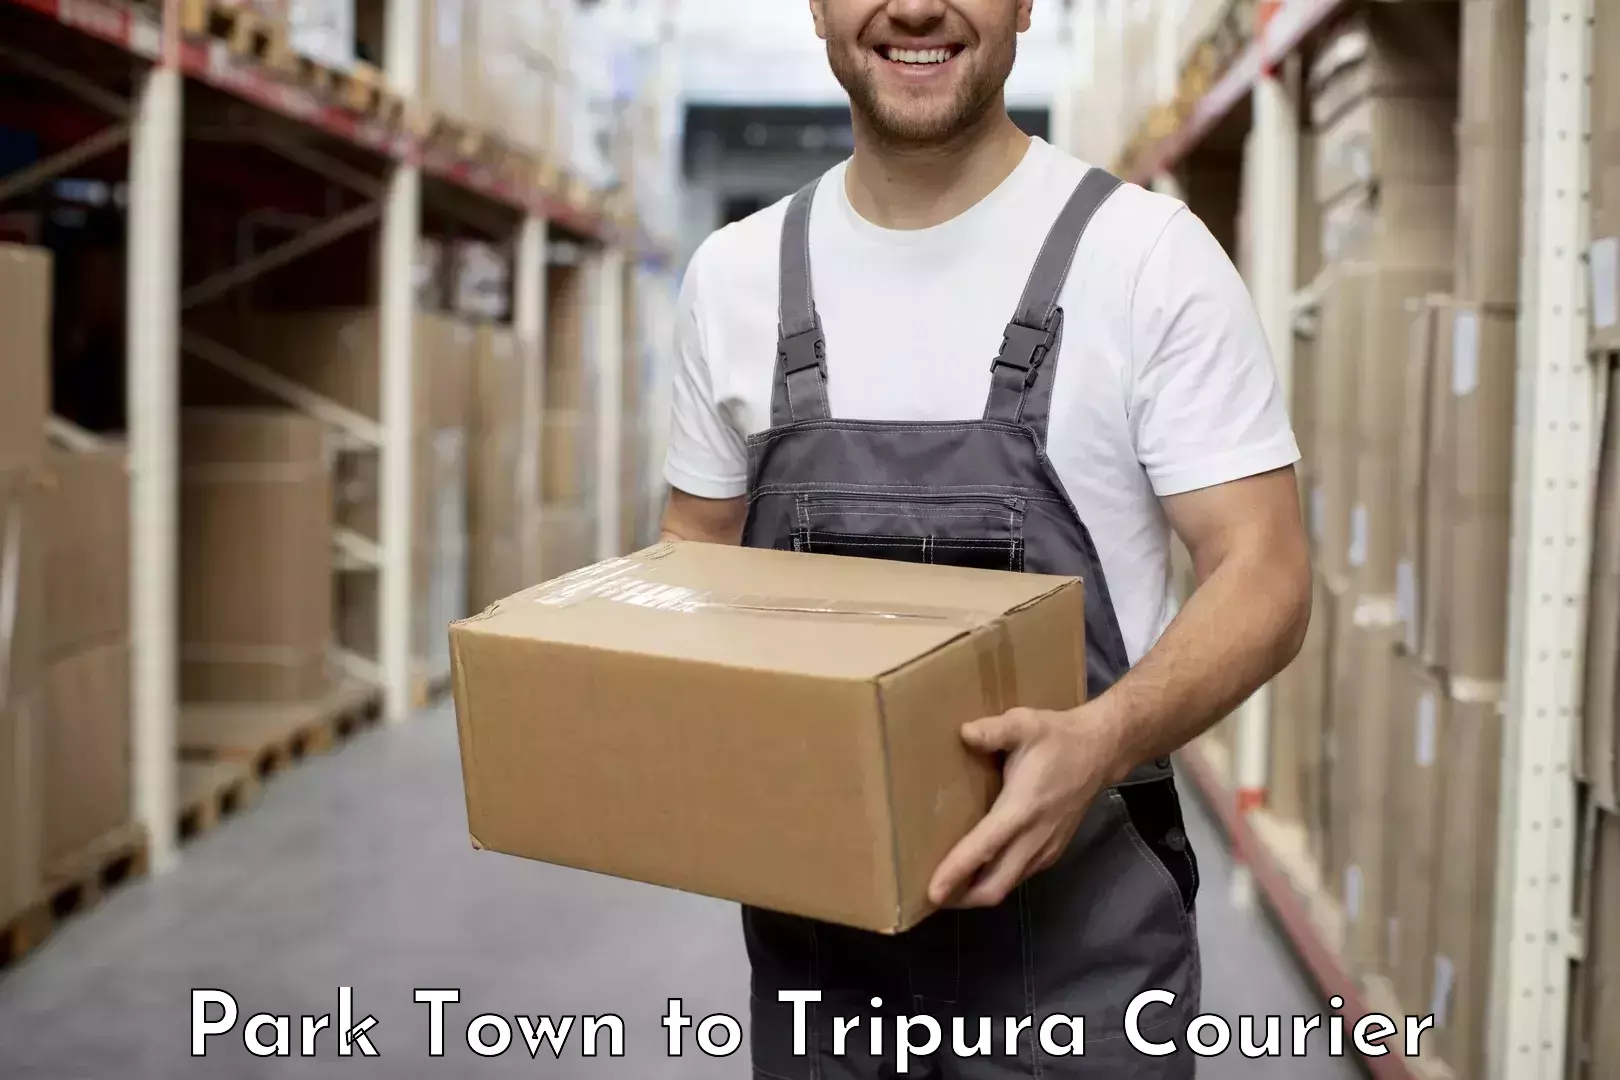 Courier services in Park Town to Udaipur Tripura